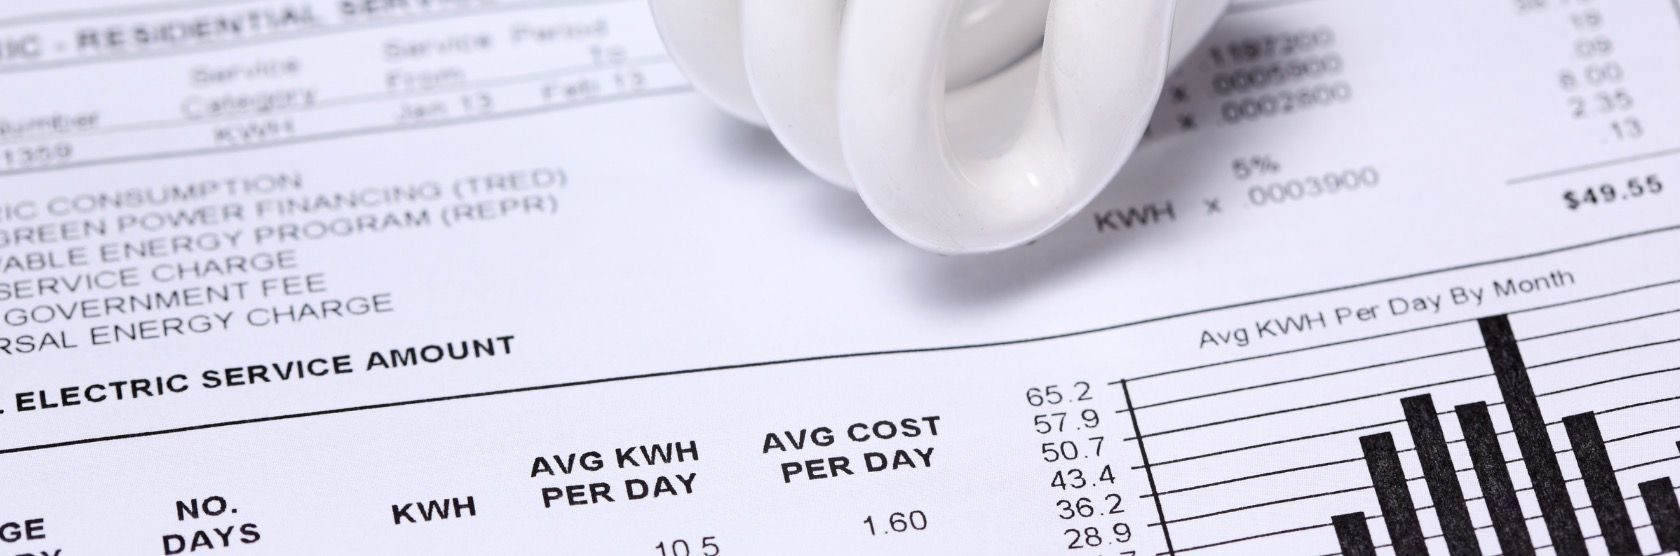 Duke Energy Price to Compare Rate Increase